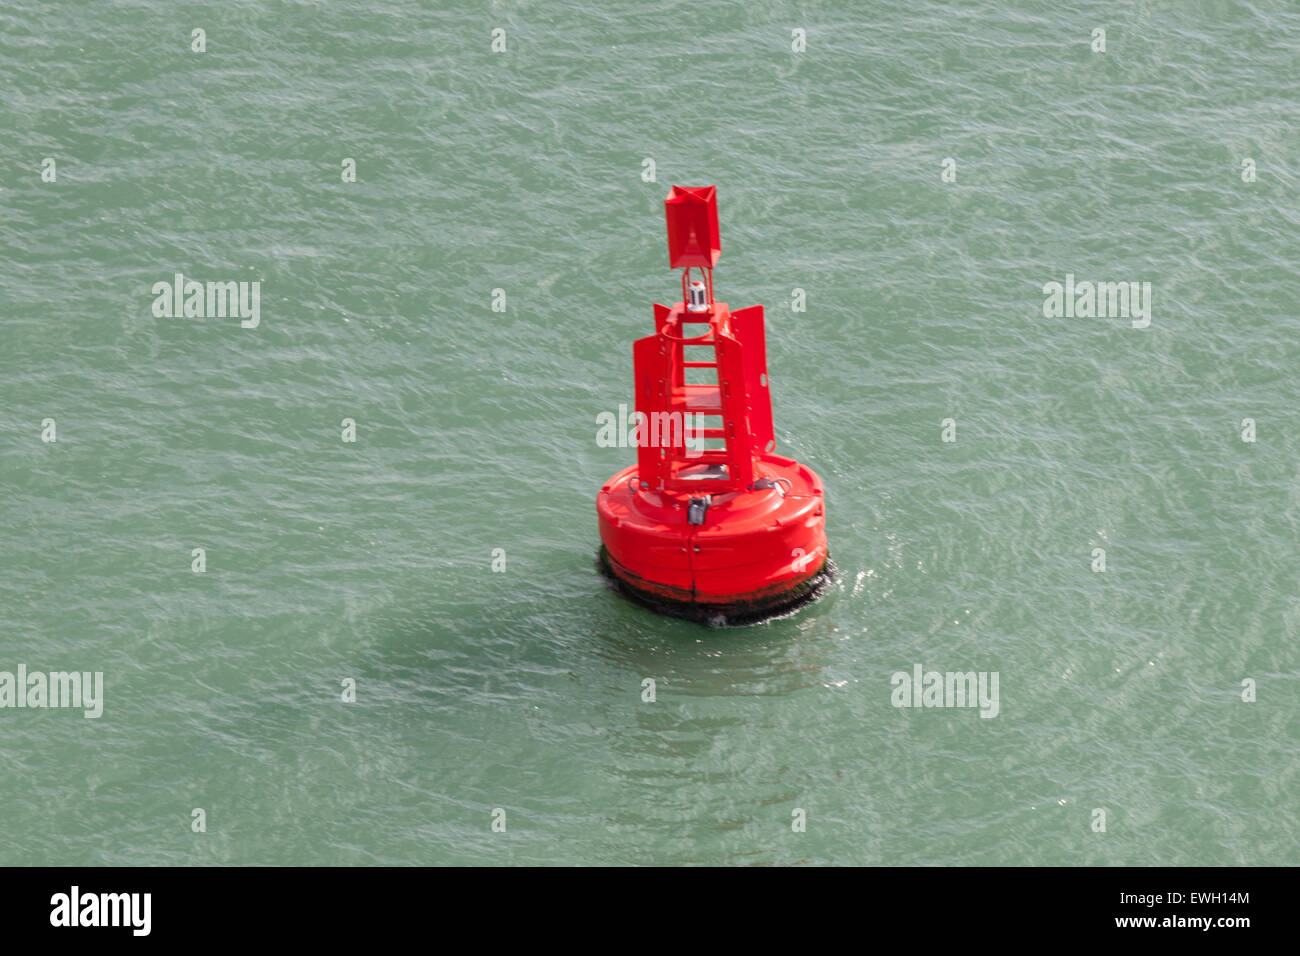 Red Buoy in the ocean Stock Photo